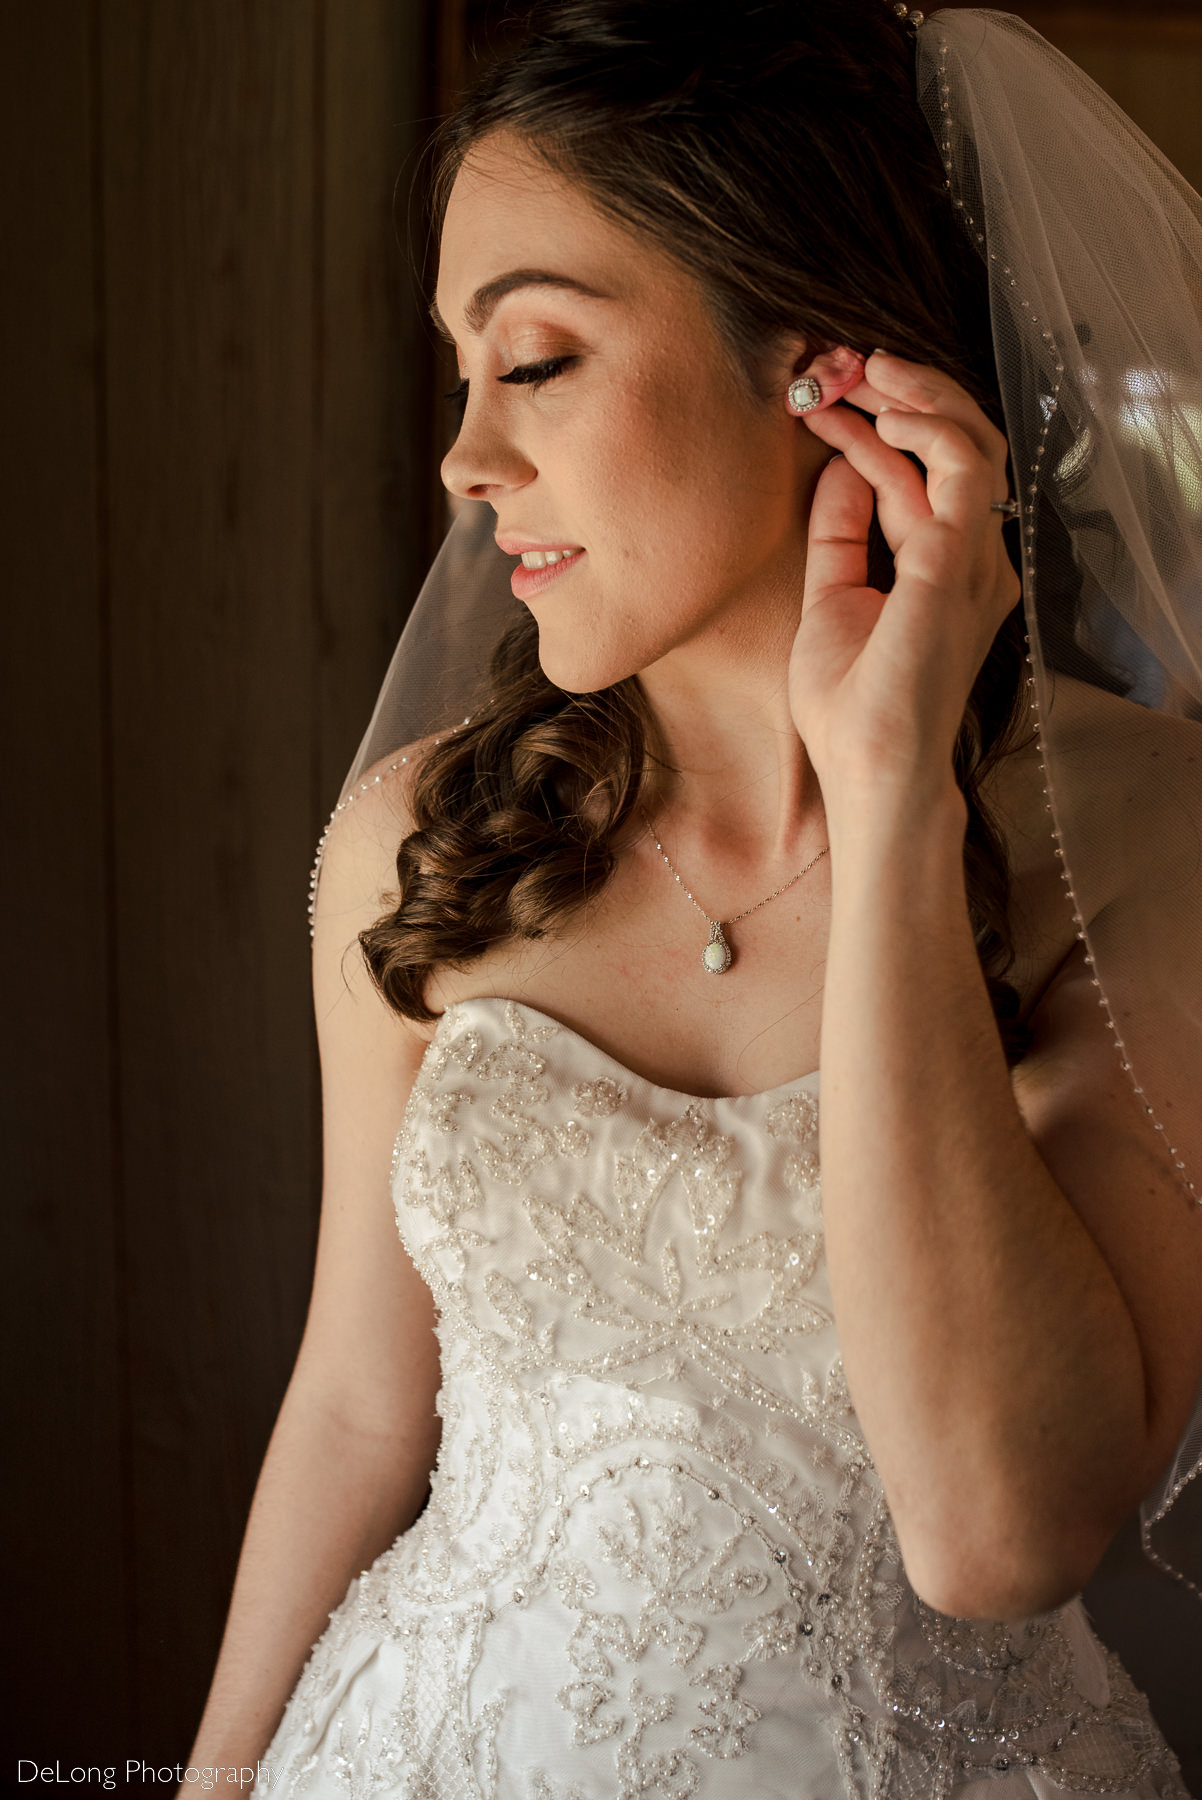 Image showcasing a bride's opal earrings and necklace